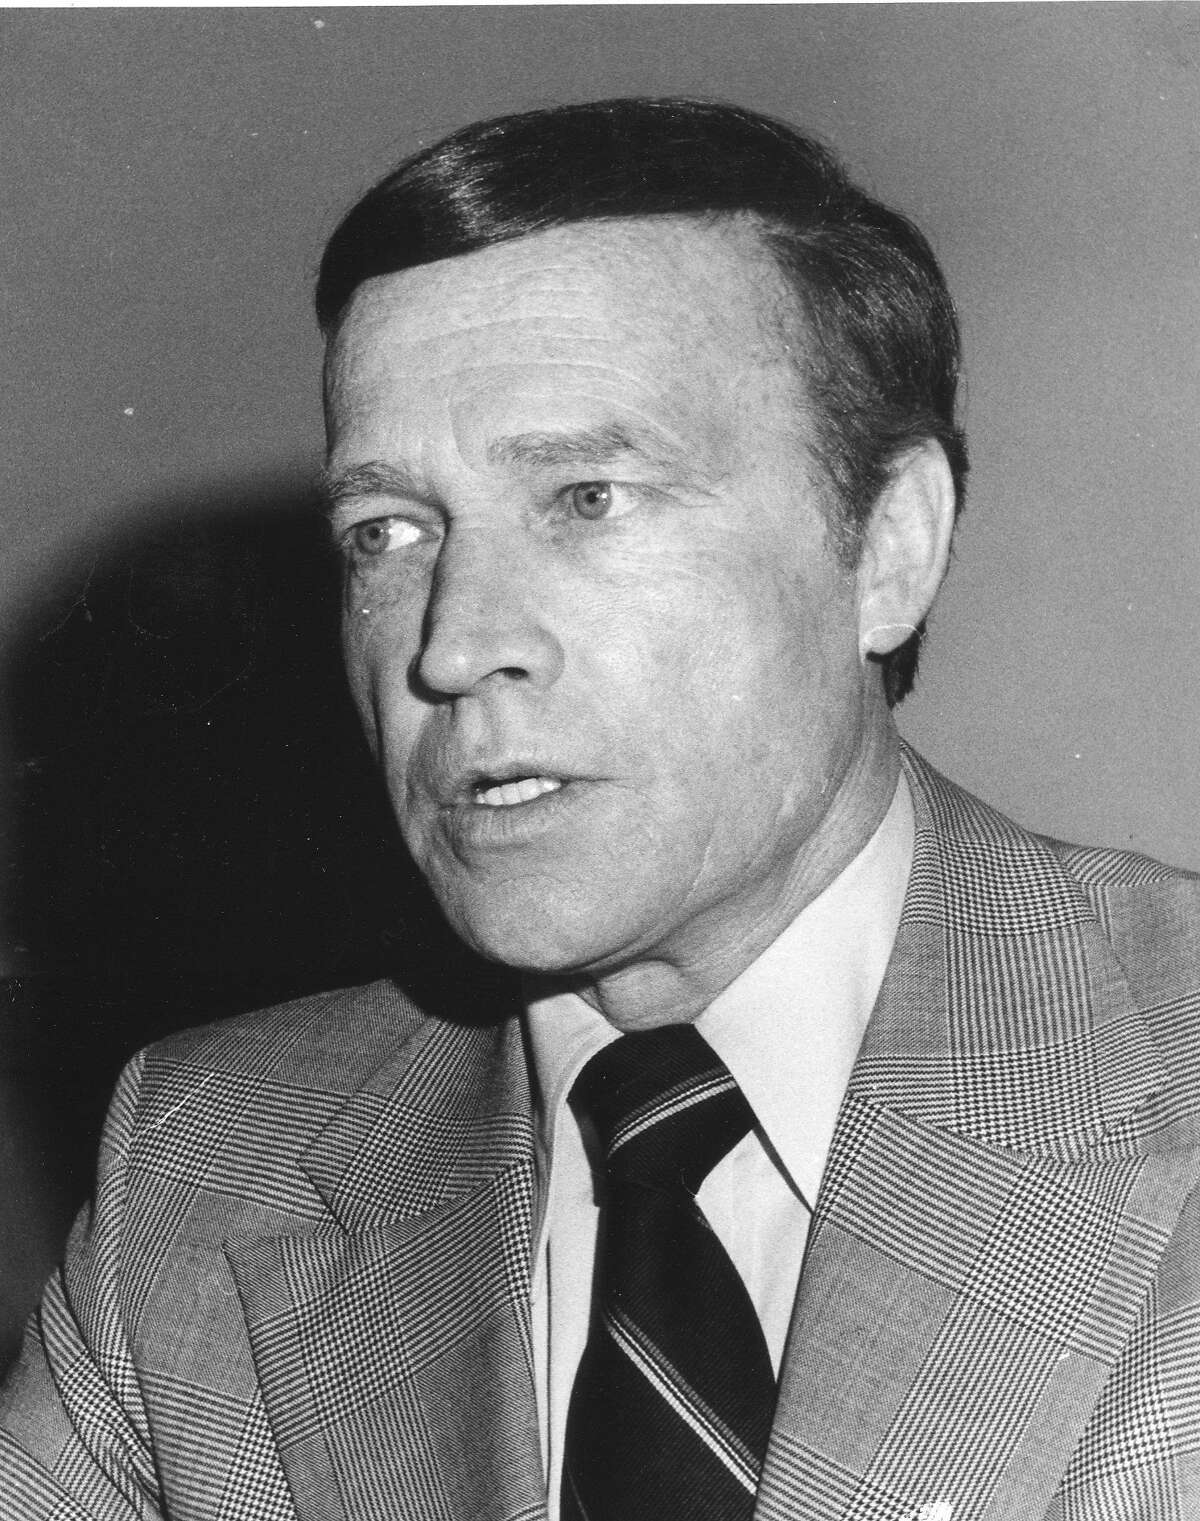 Police Chief Charles Gain, March 22, 1977